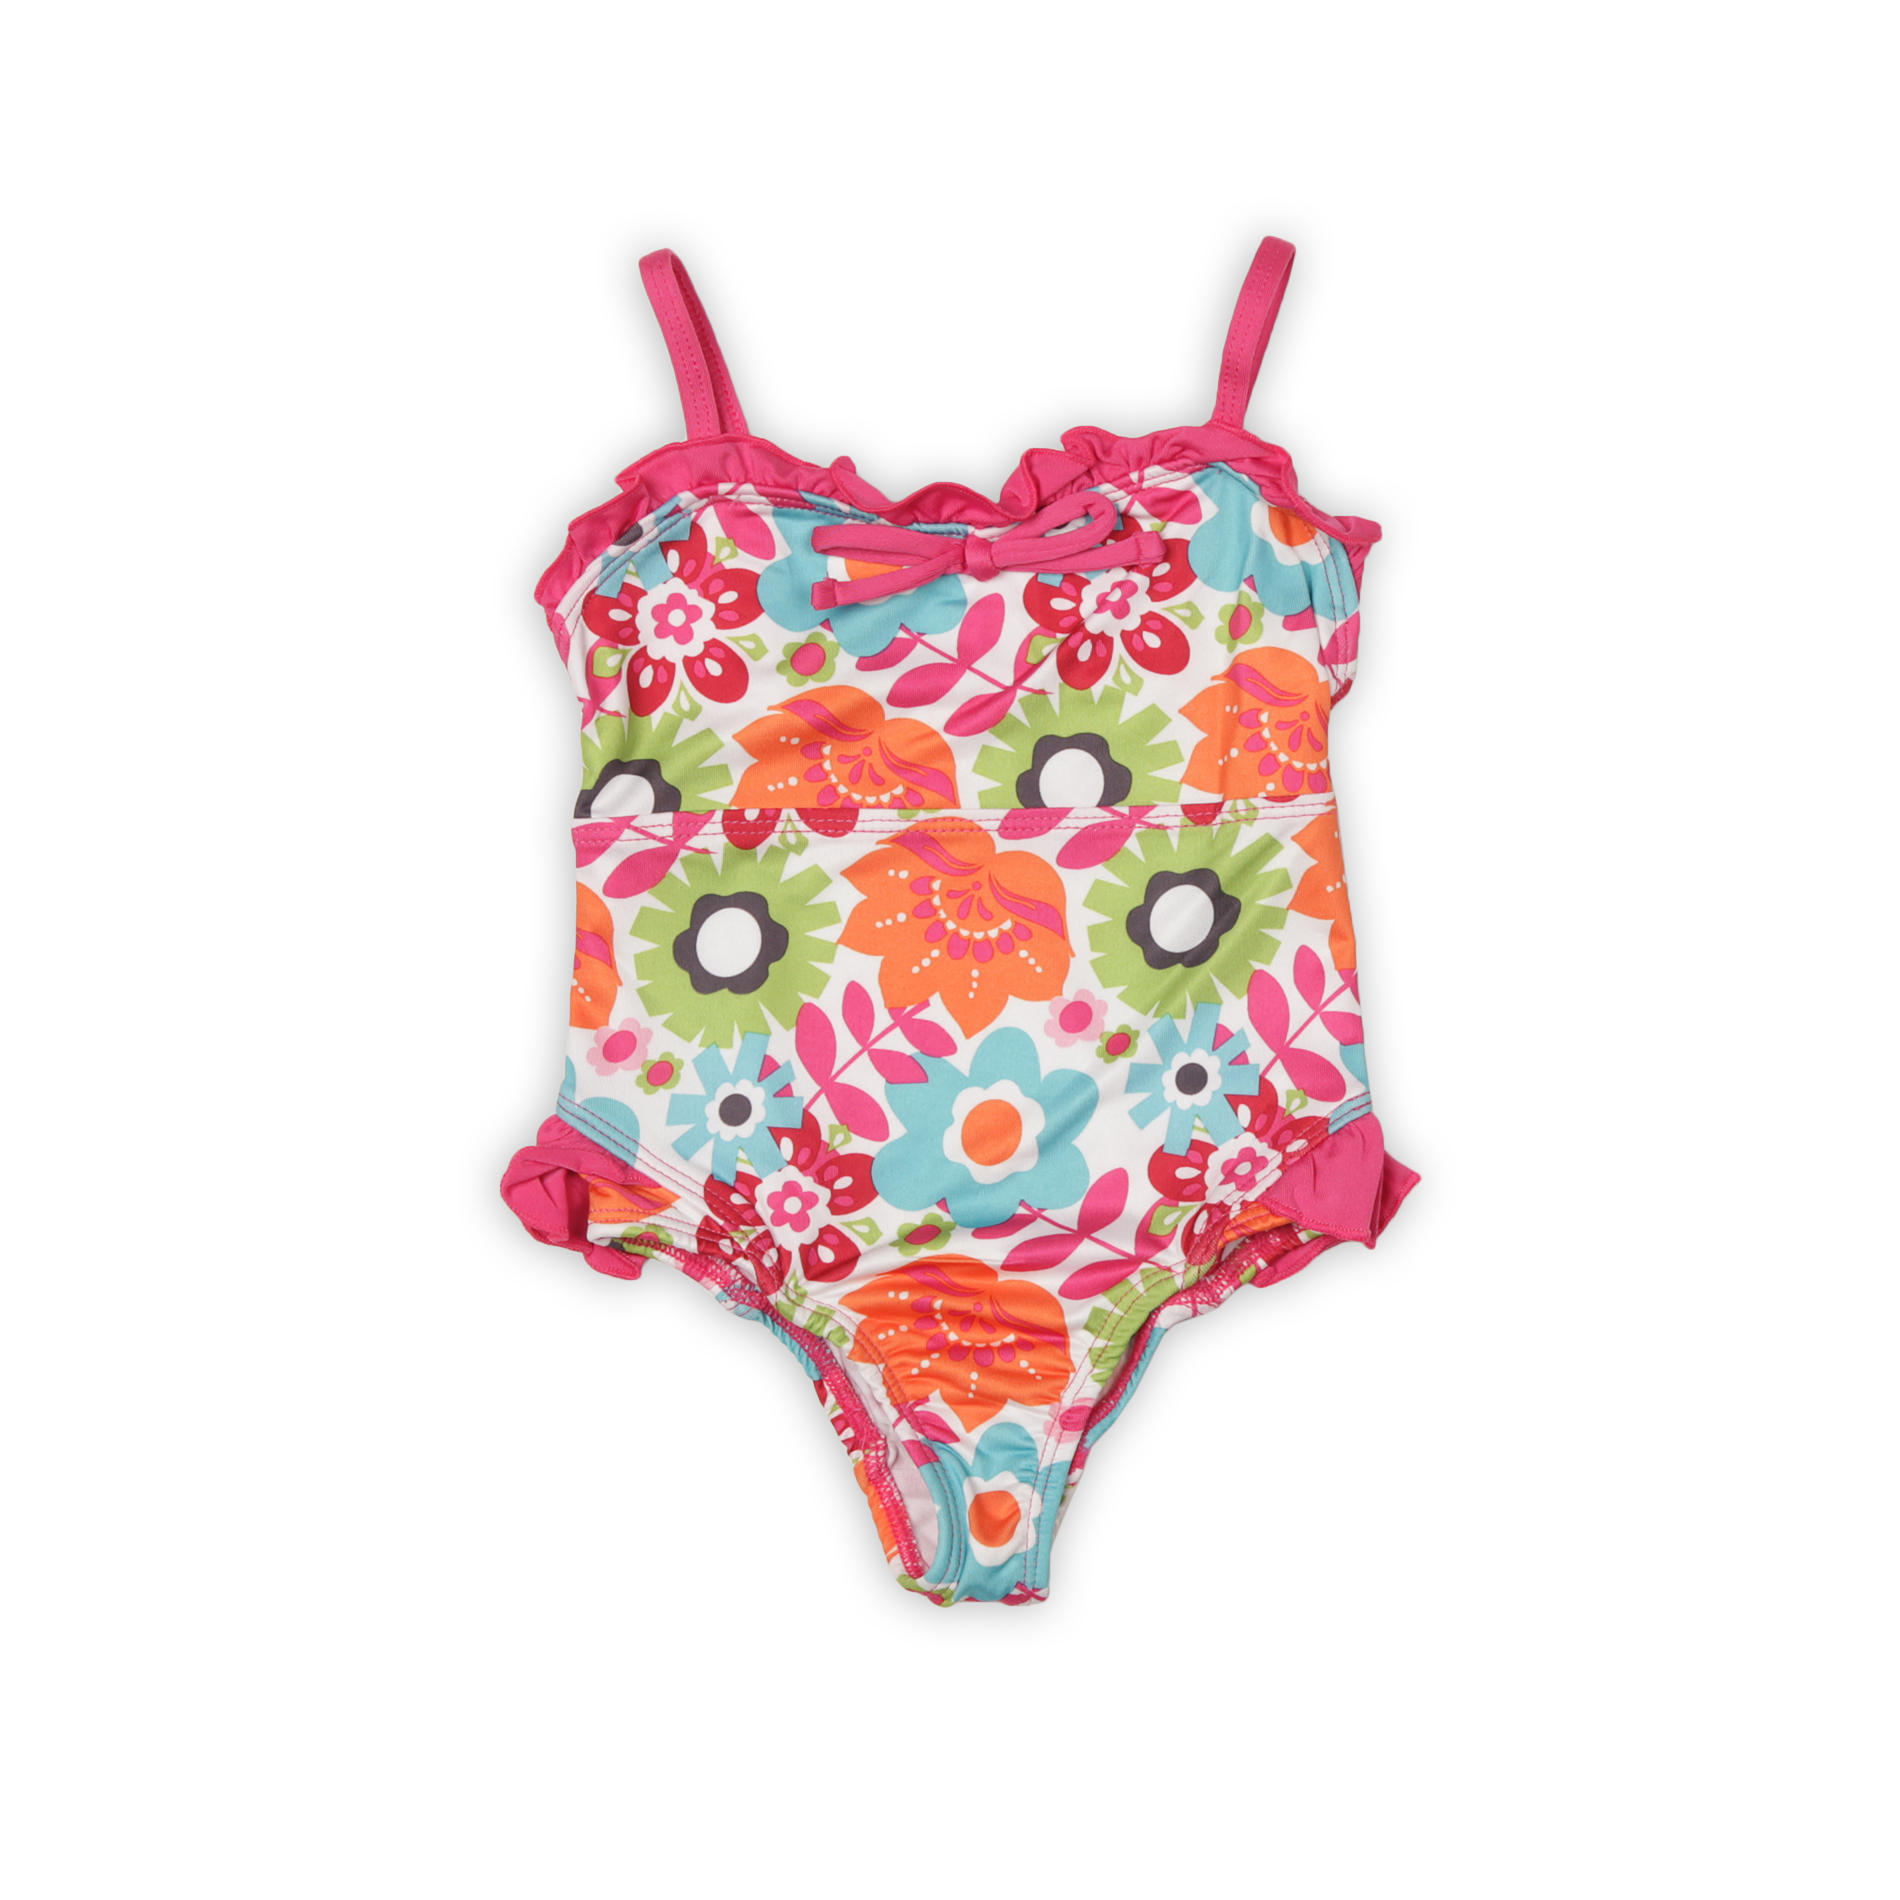 Pink Platinum Infant & Toddler Girl's One-Piece Swimsuit - Rainbow Floral